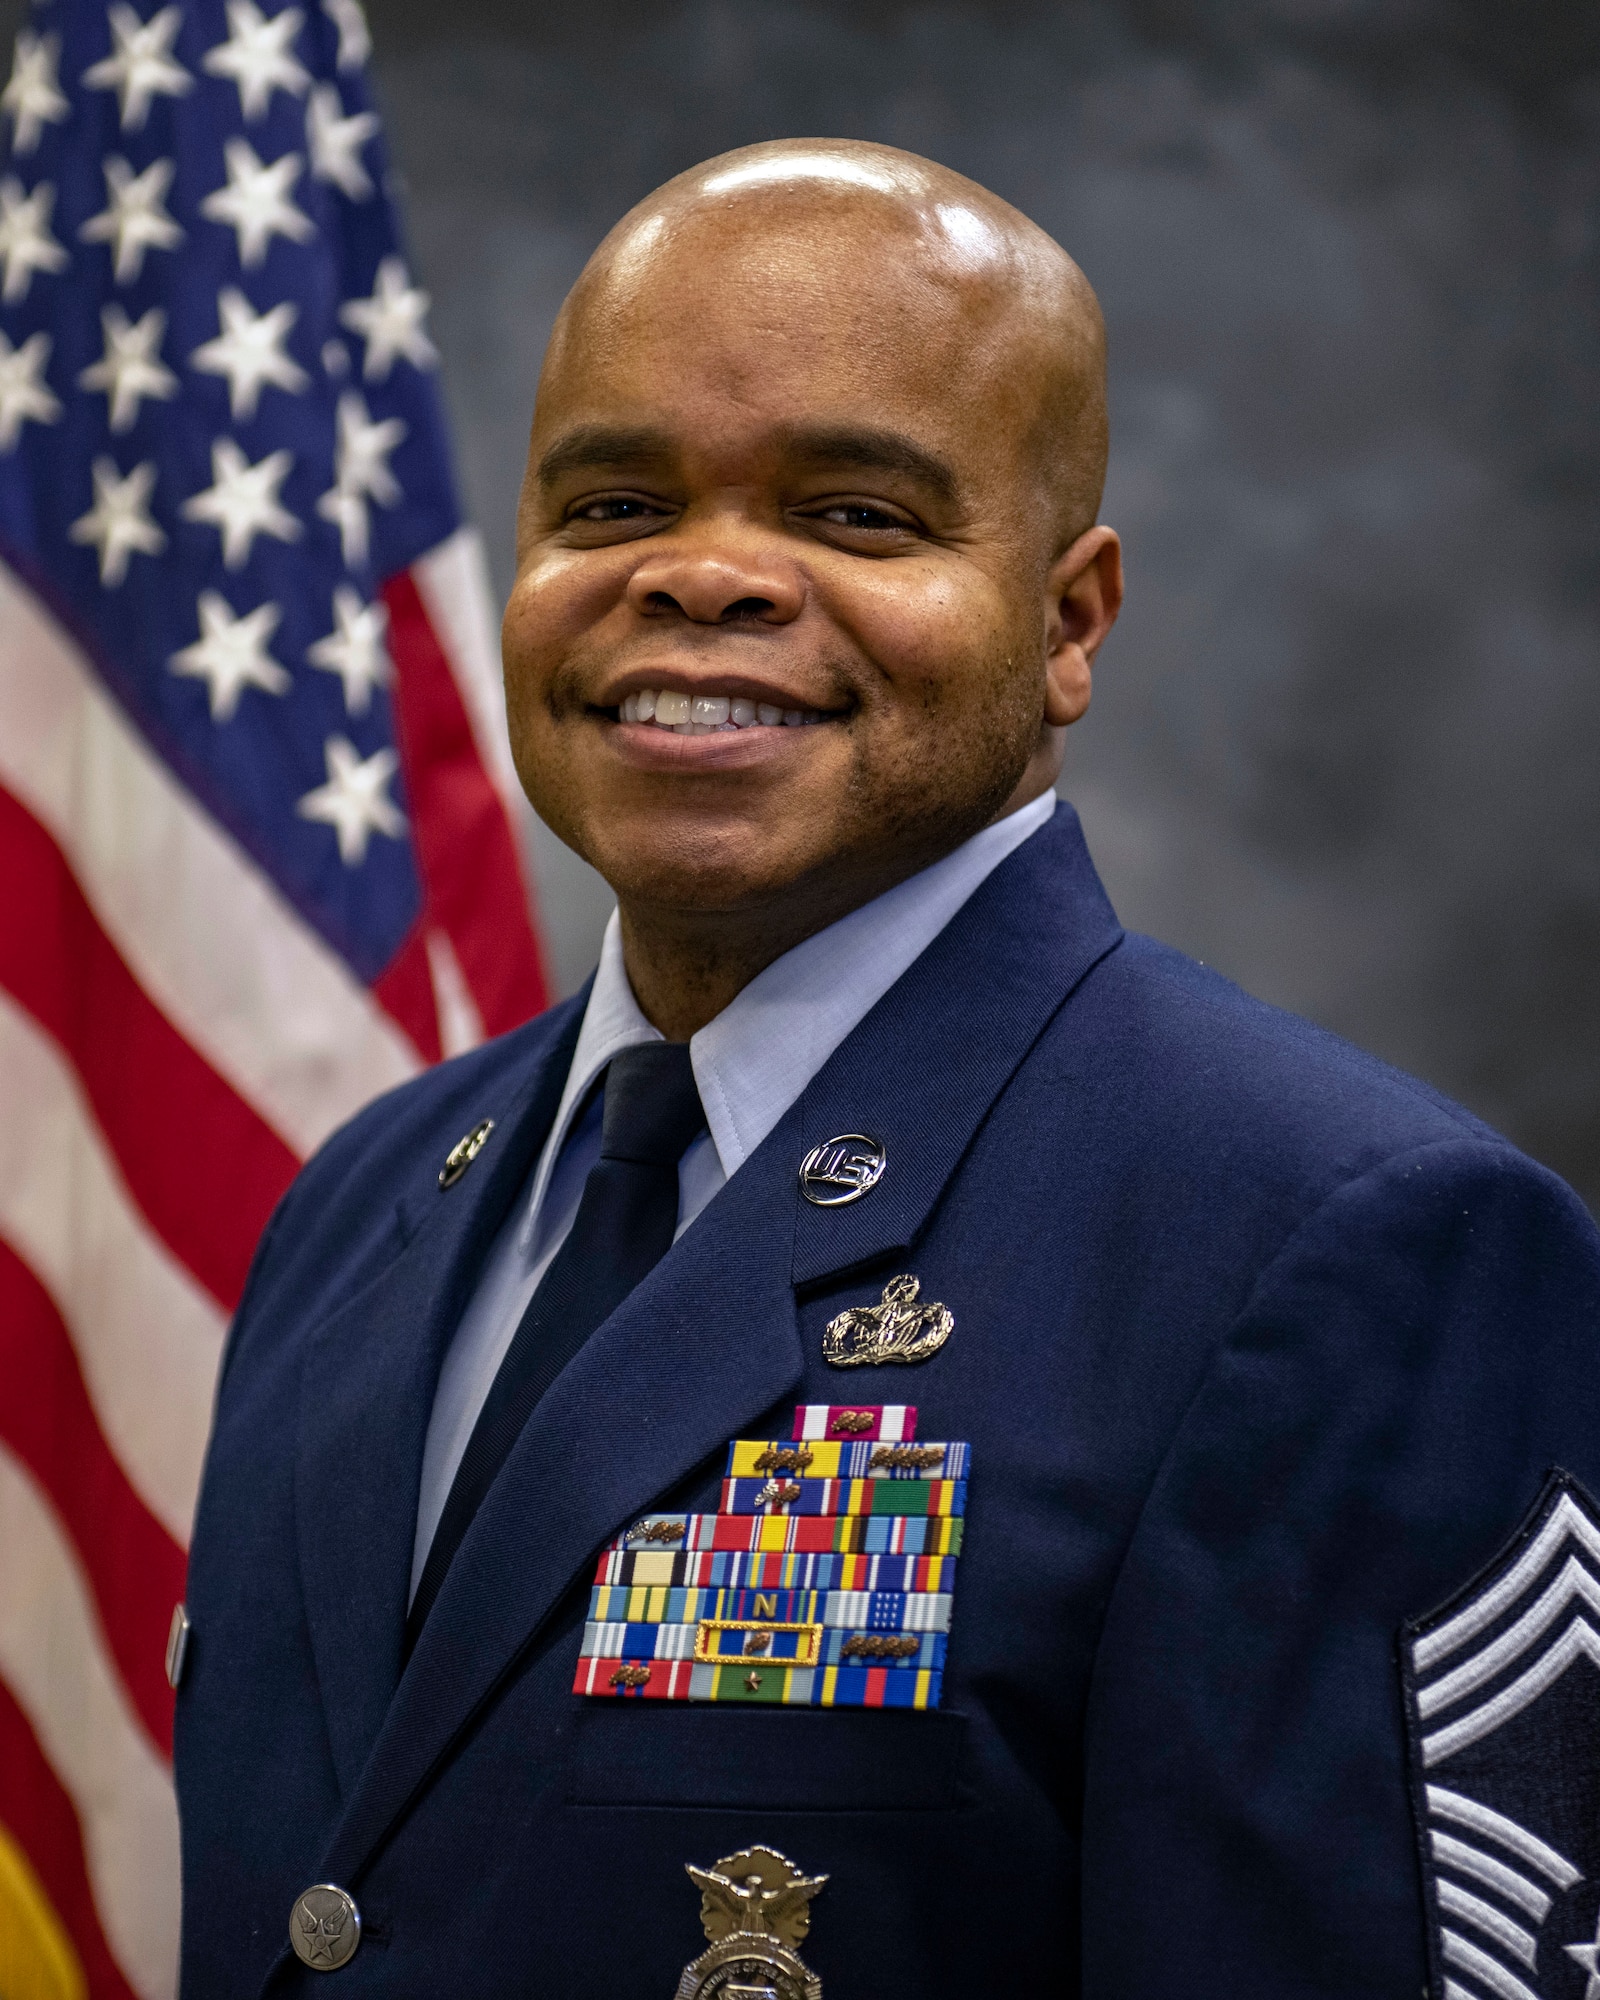 U.S. Air Force Chief Master Cleophus Gallon, 422nd Security Forces Squadron senior enlisted leader, poses for an official photo at Royal Air Force Croughton, England, Jan. 26, 2022. (U.S. Air Force photo by Senior Airman Jason Cochran)